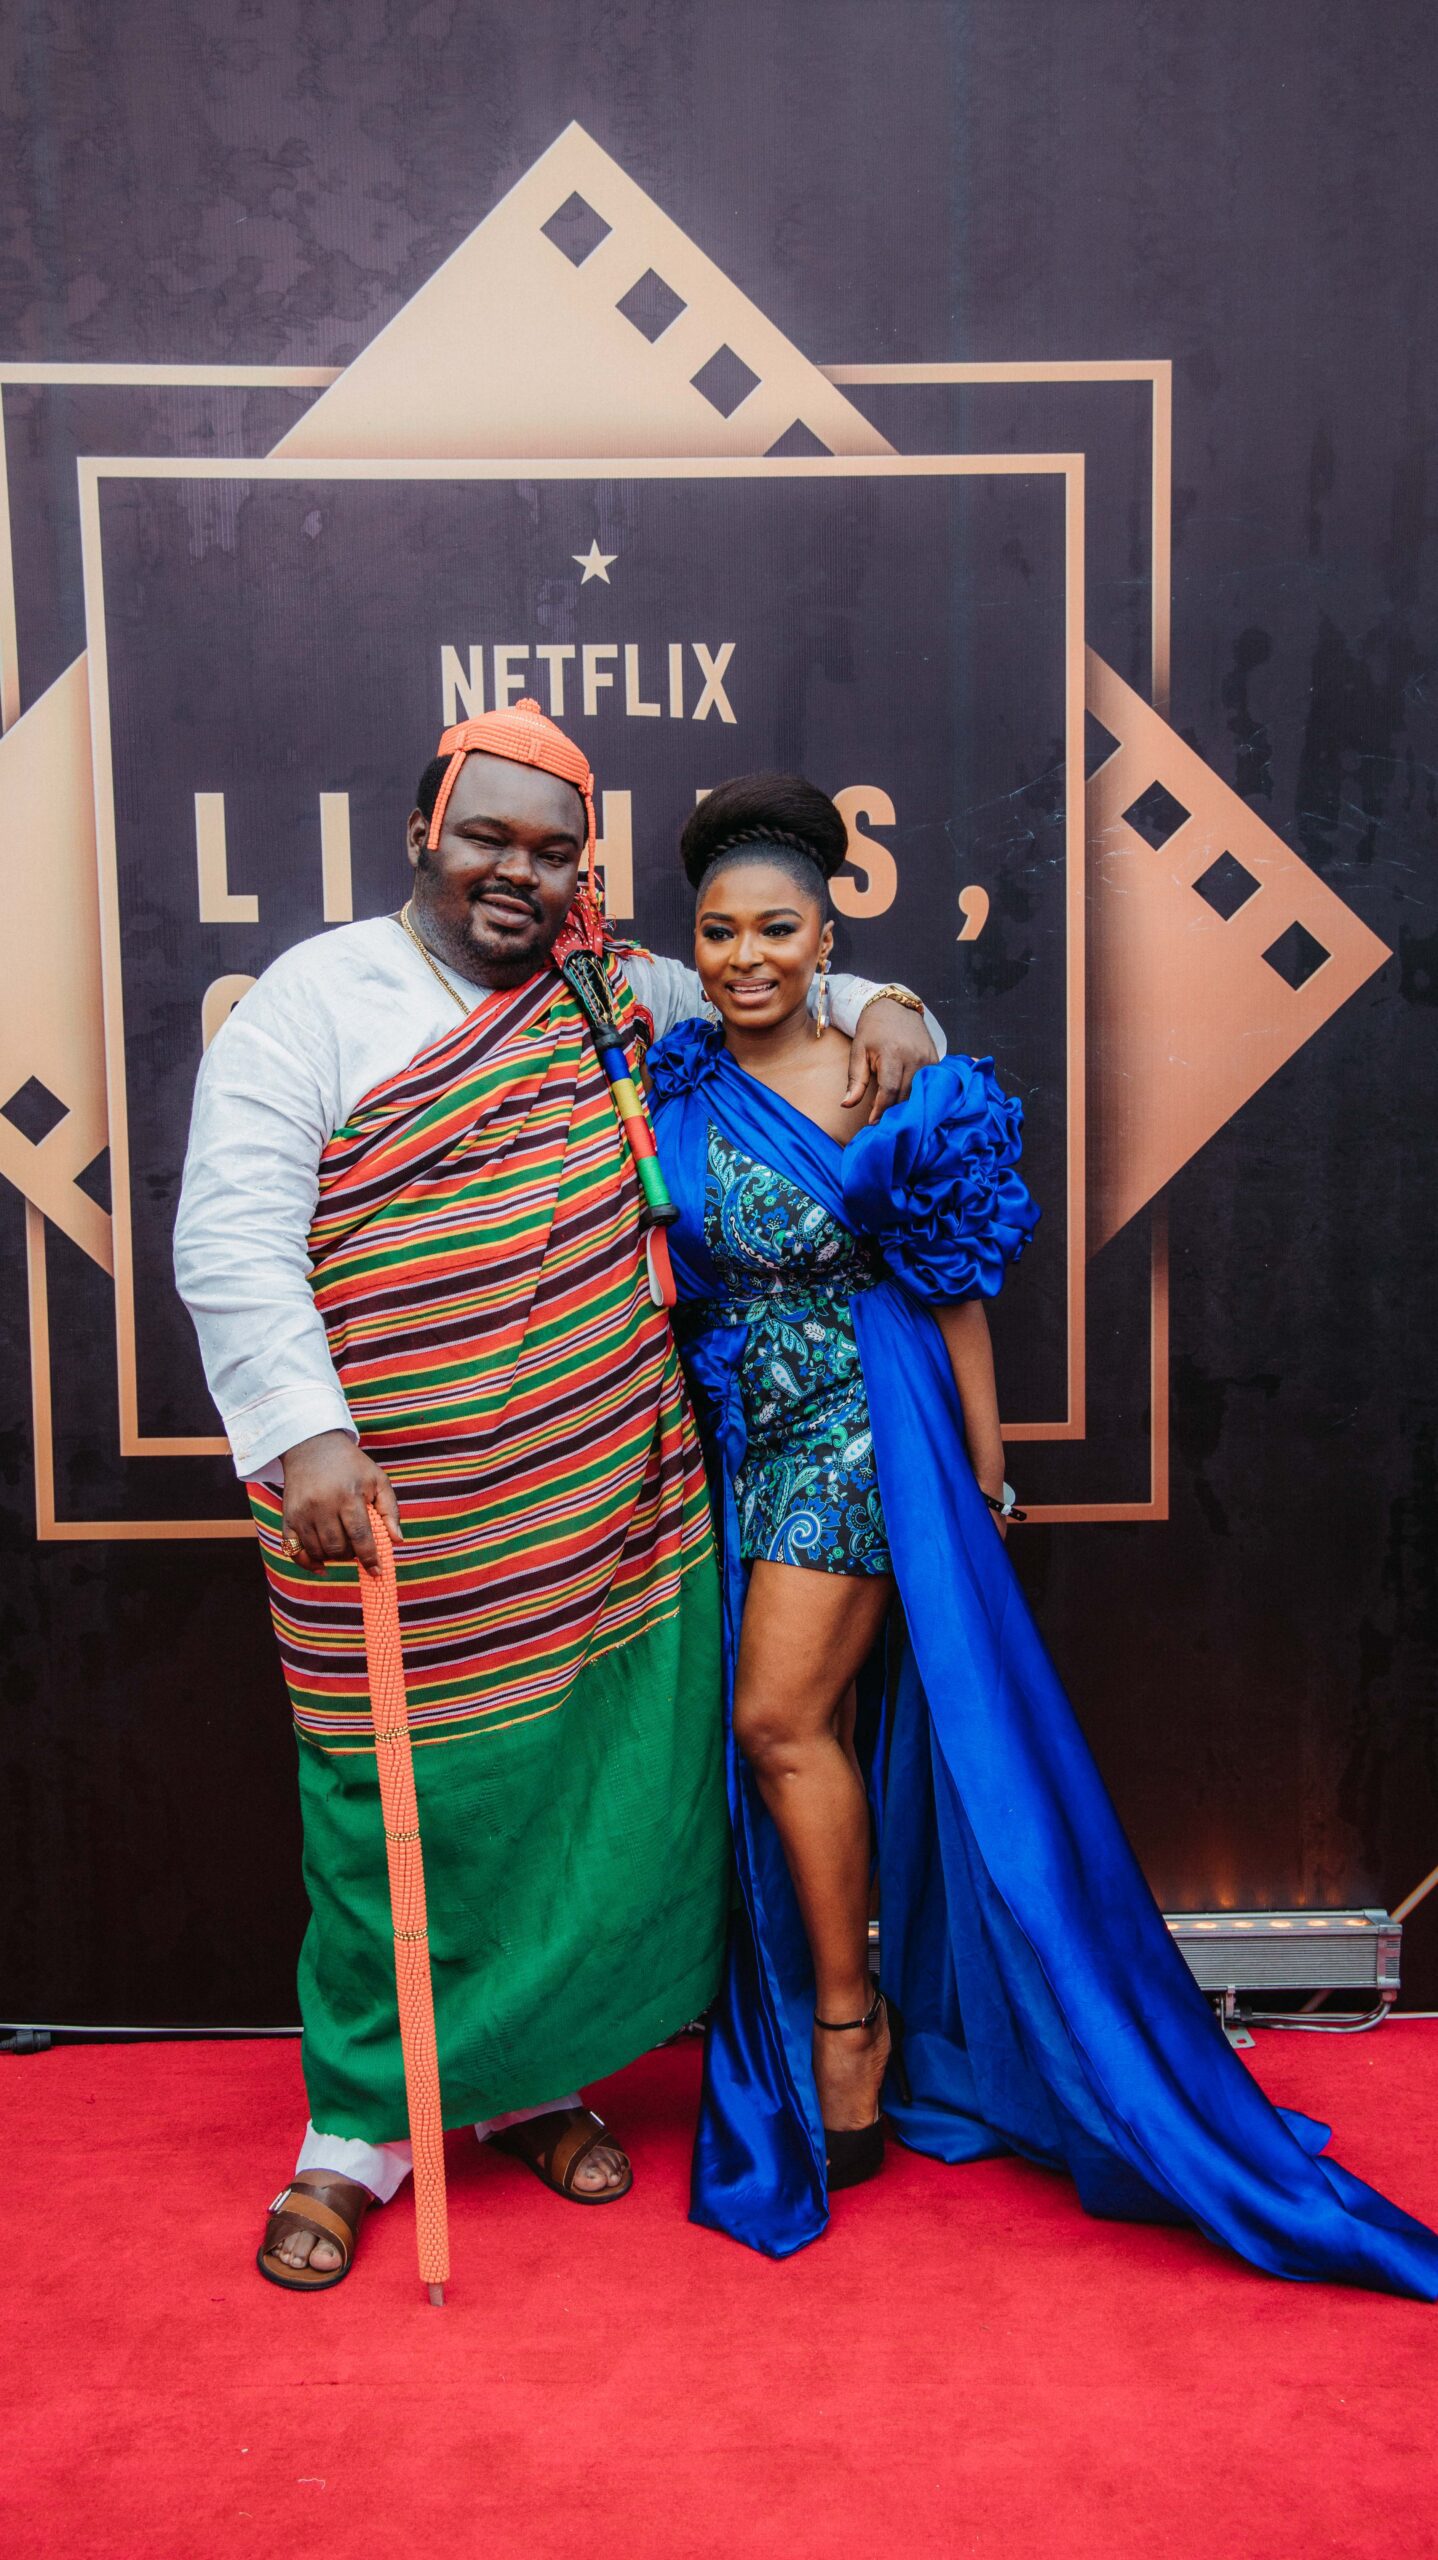 RED CARPET 307 scaled - Red Carpet Photos From Netflix's "Lights, Action, Naija!"